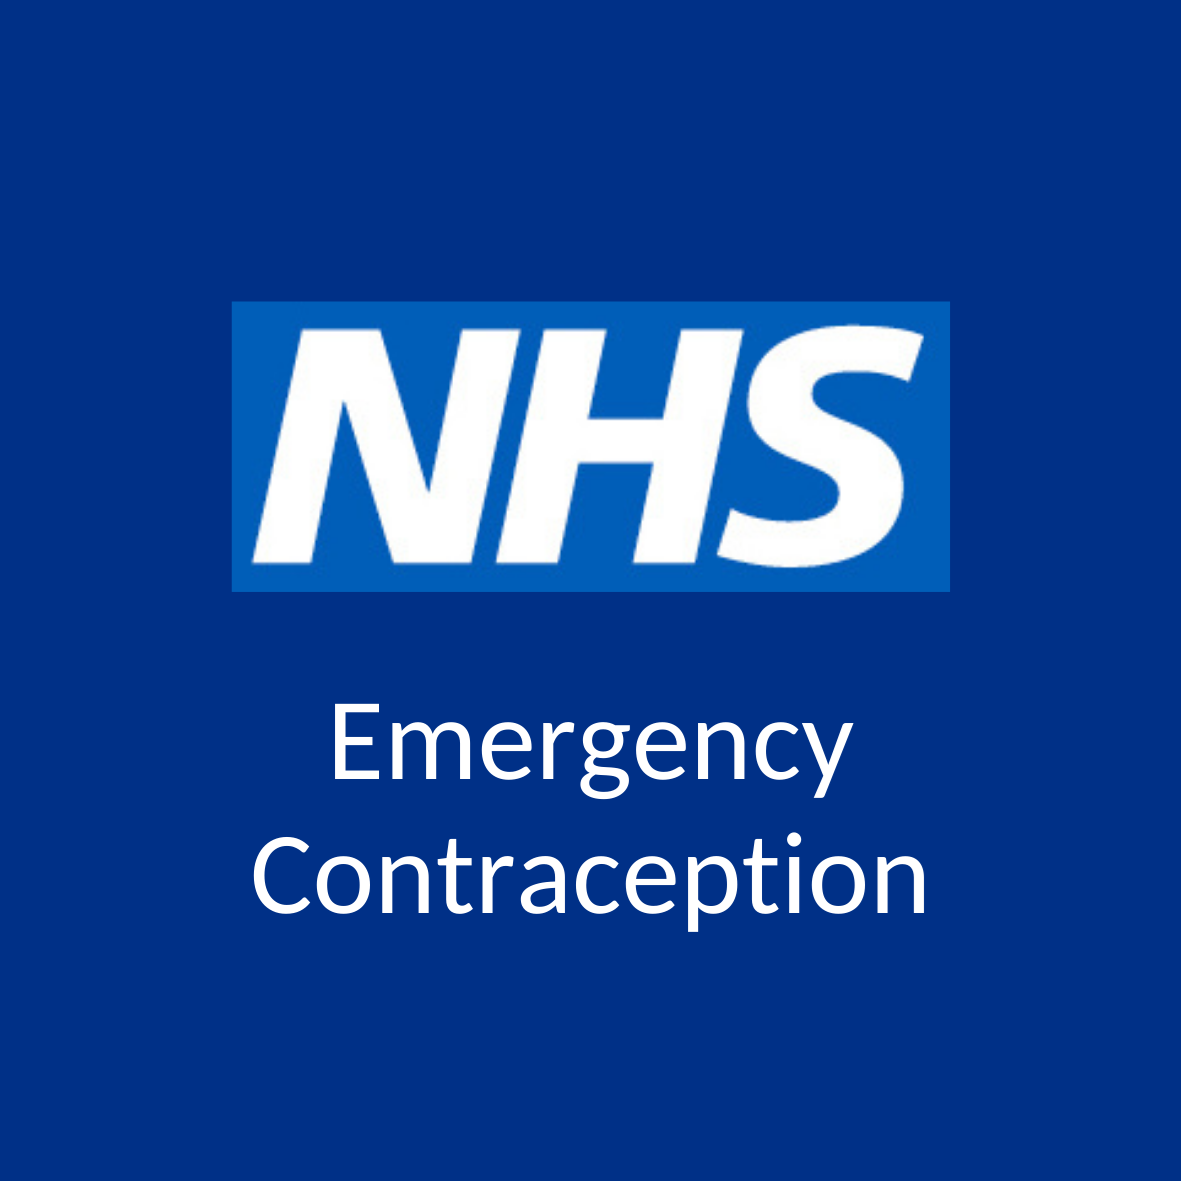 NHS Logo with Words 'Emergency Contraception'